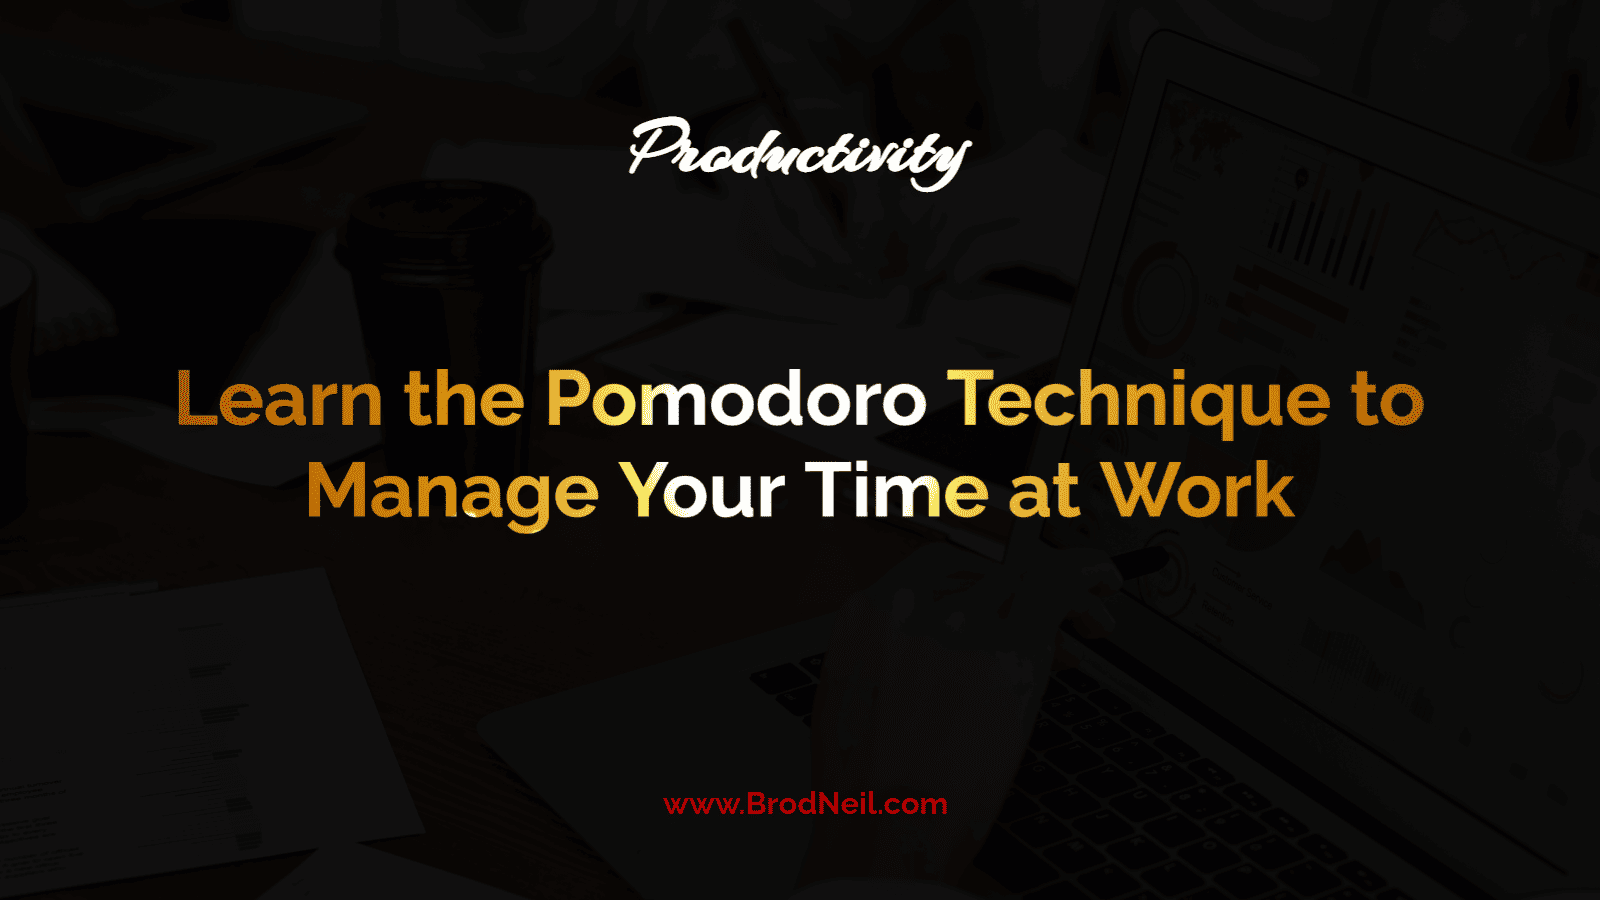 Learn the Pomodoro Technique to Manage Your Time at Work